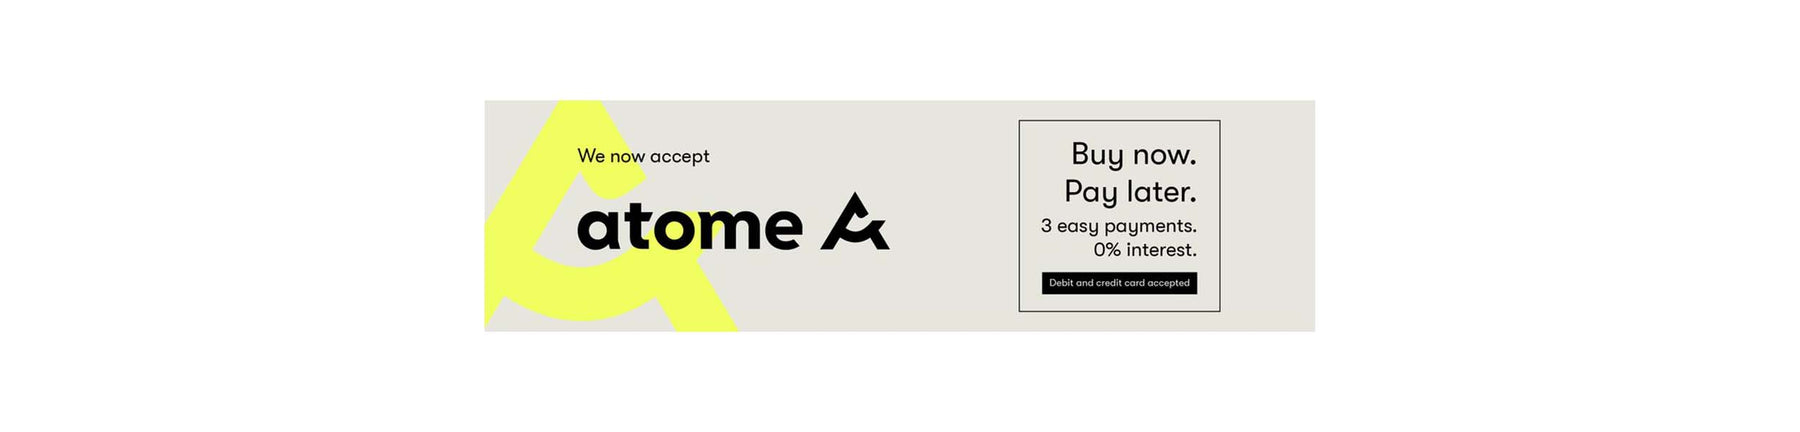 Atome ad banner